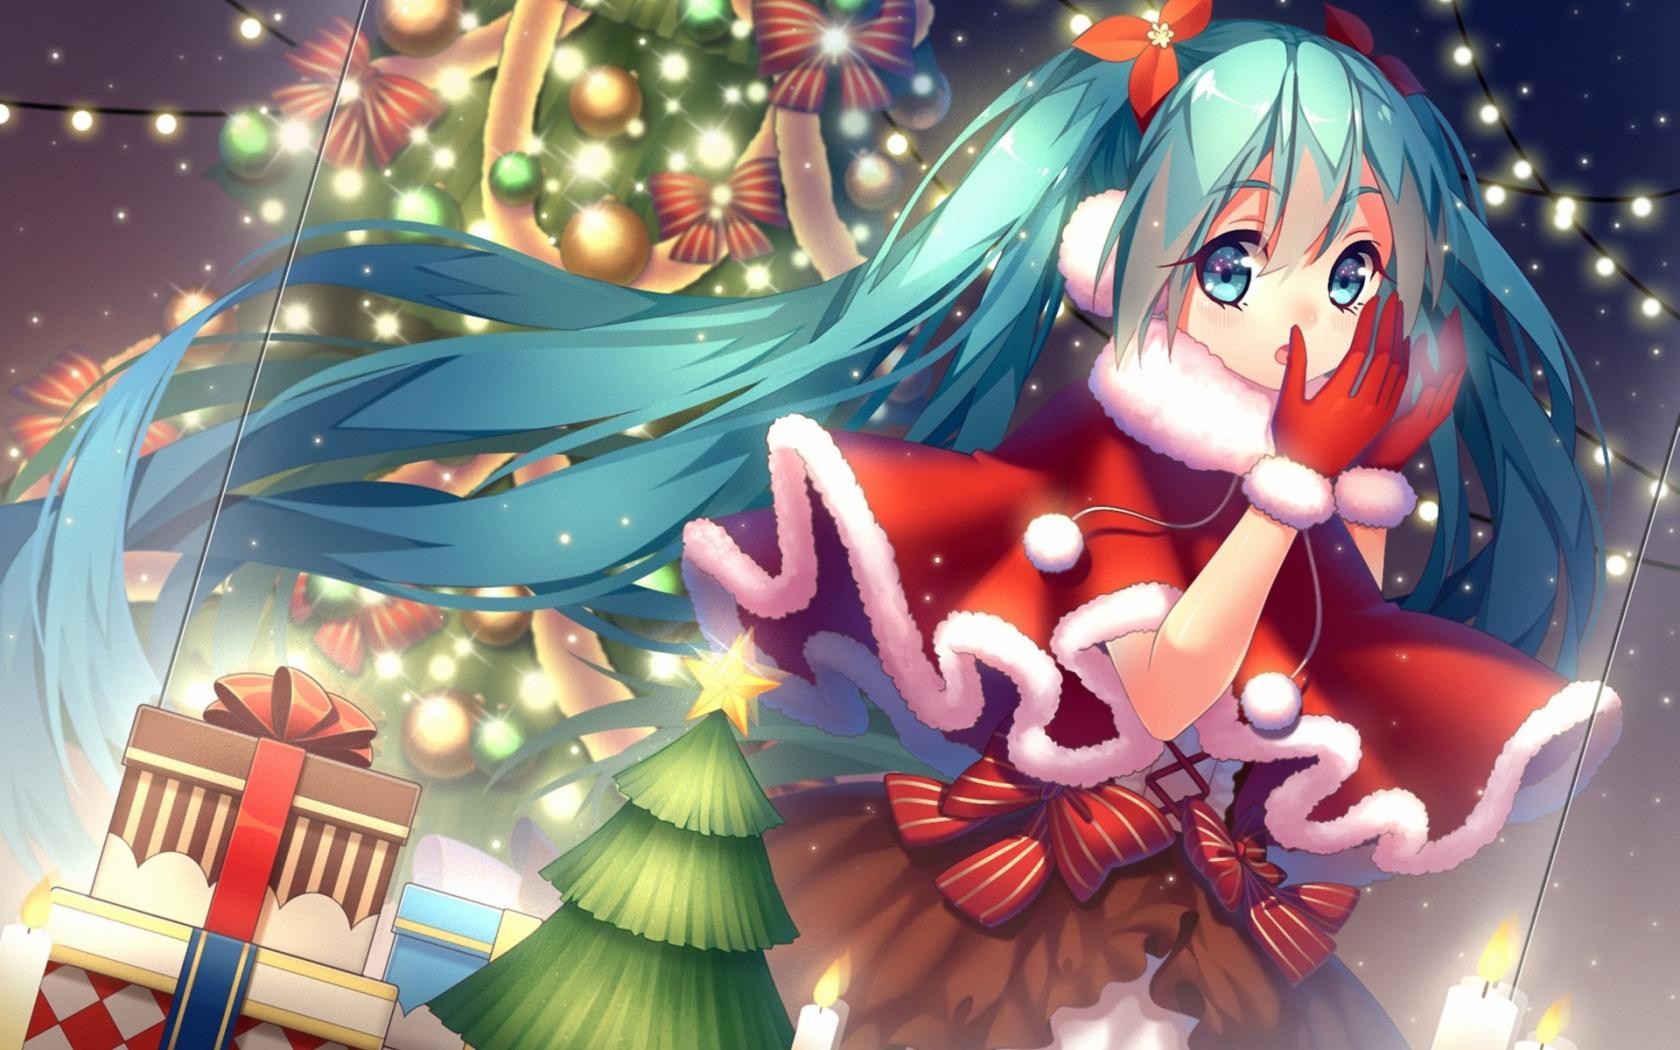 The Anime Wallpaper Category Of HD Christmas